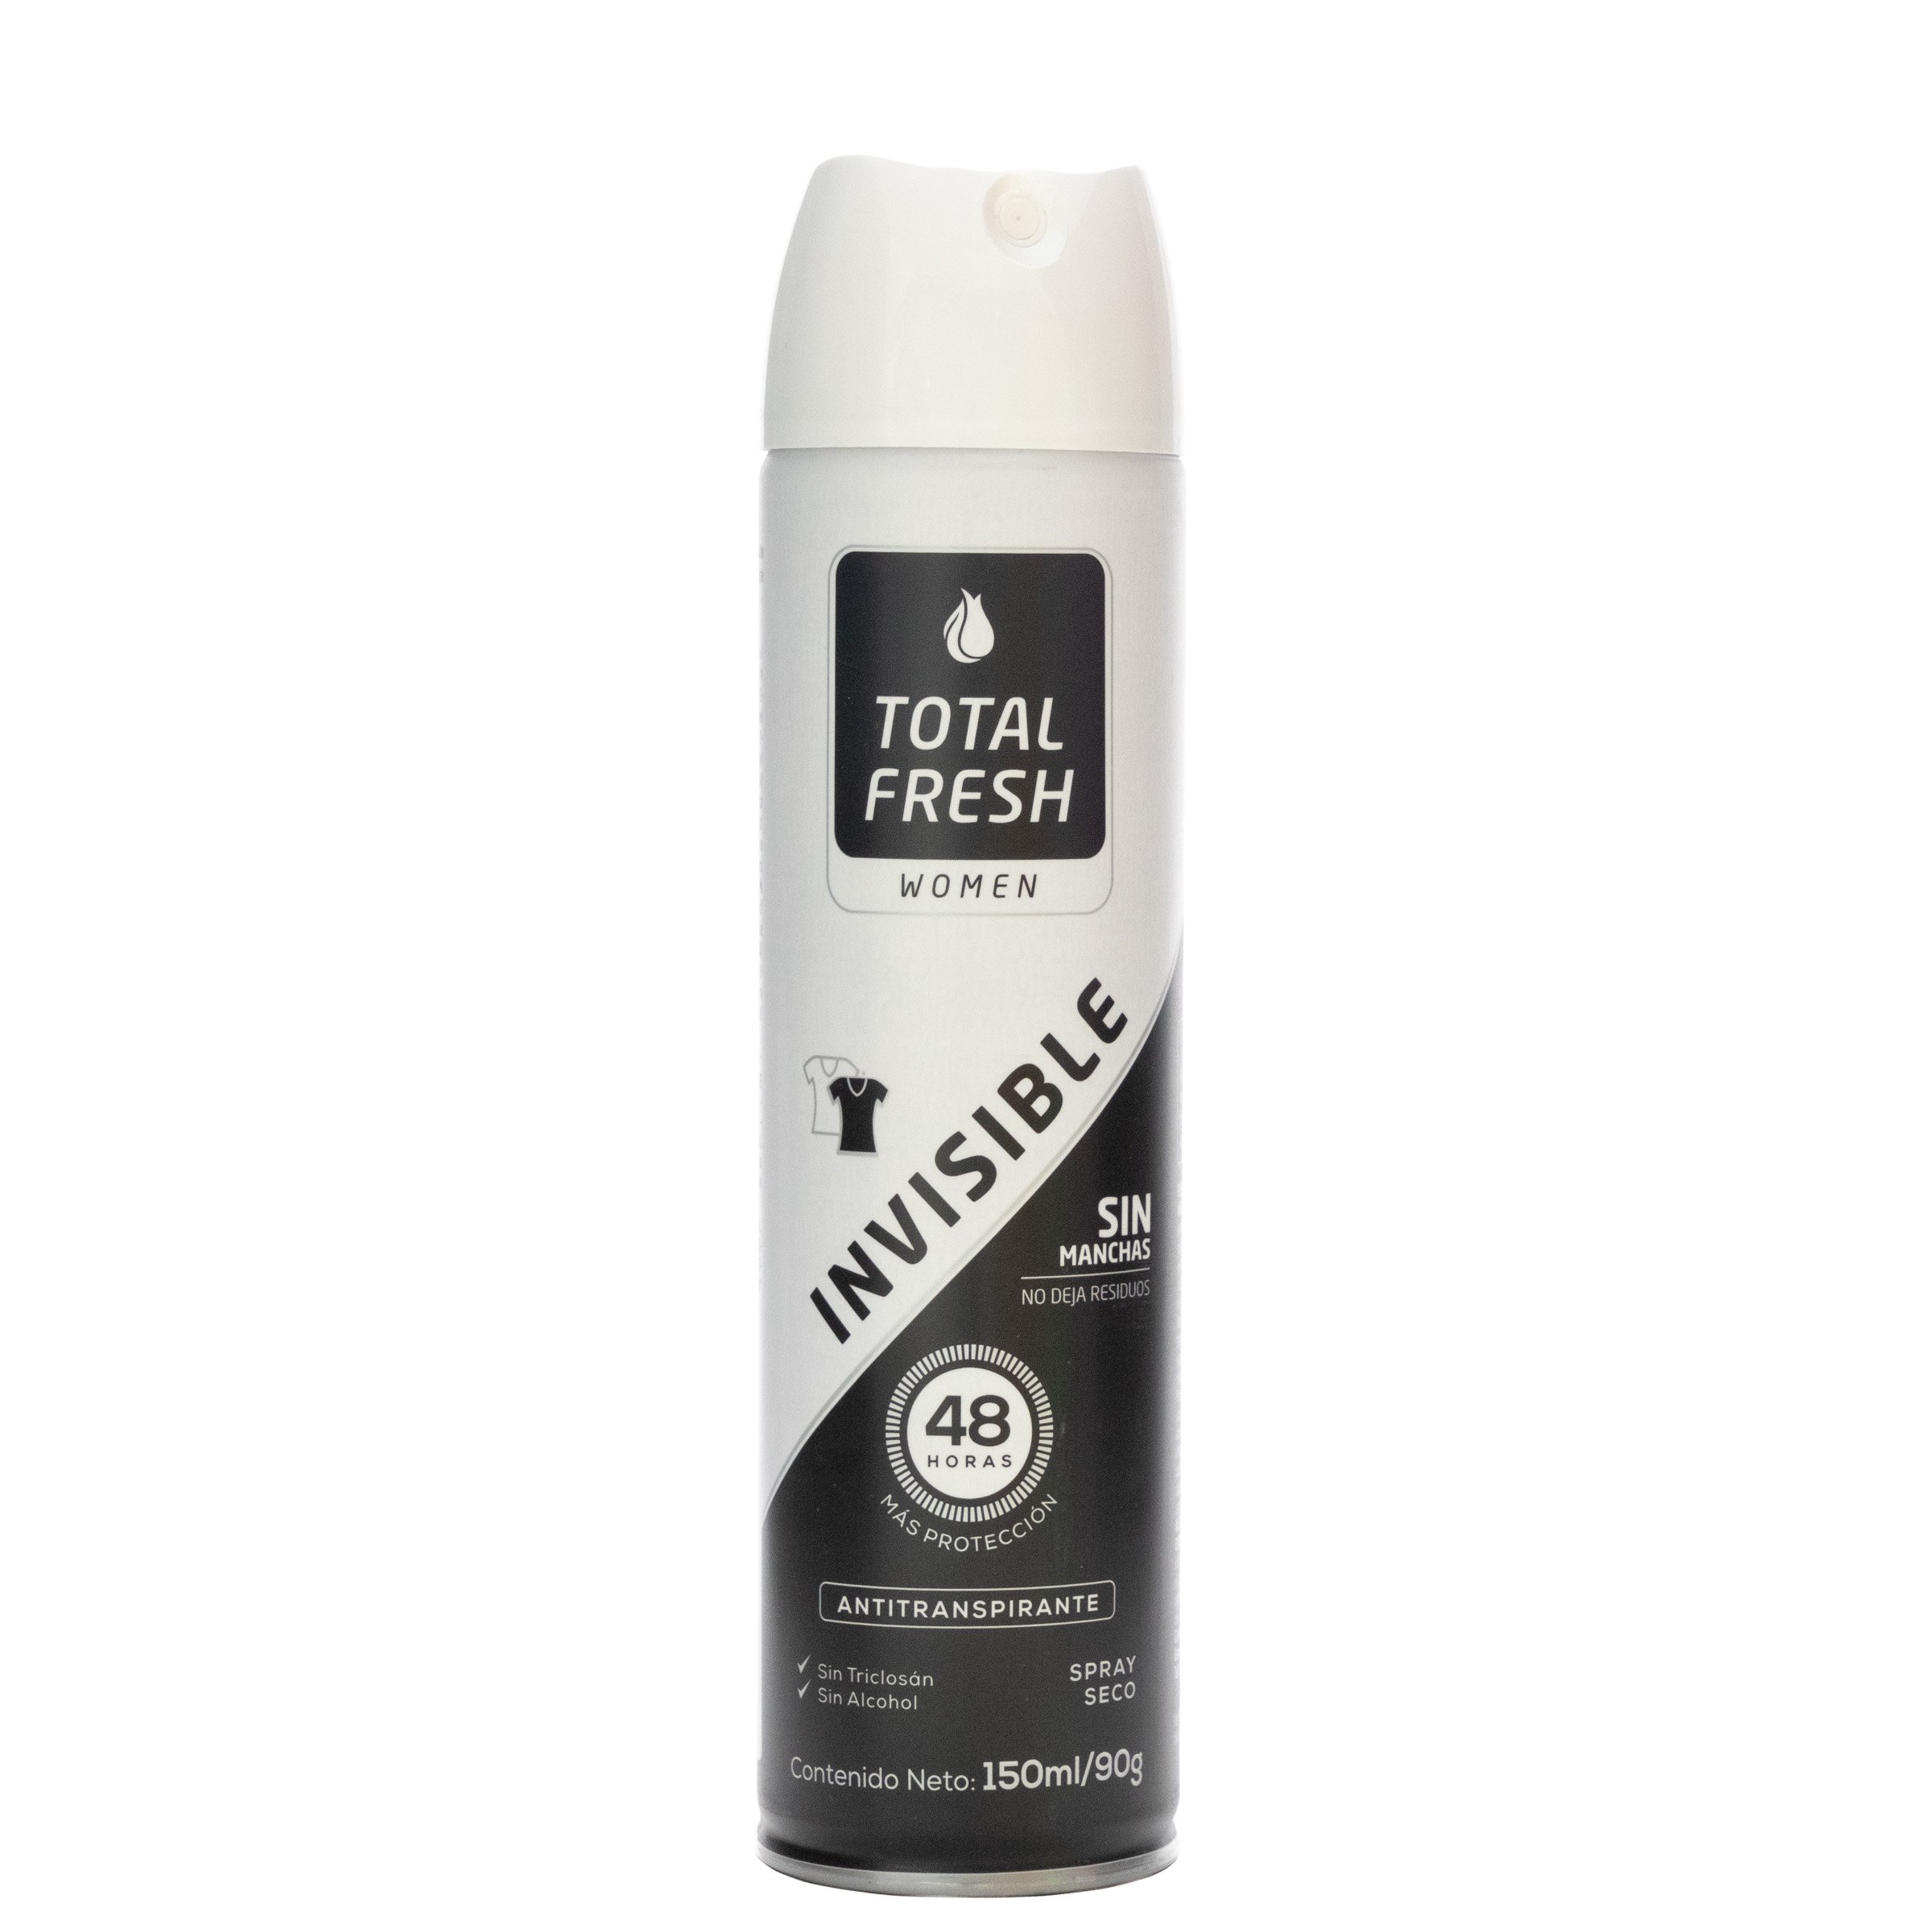 TOTAL FRESH DEO AER 150 ML INV WOMA